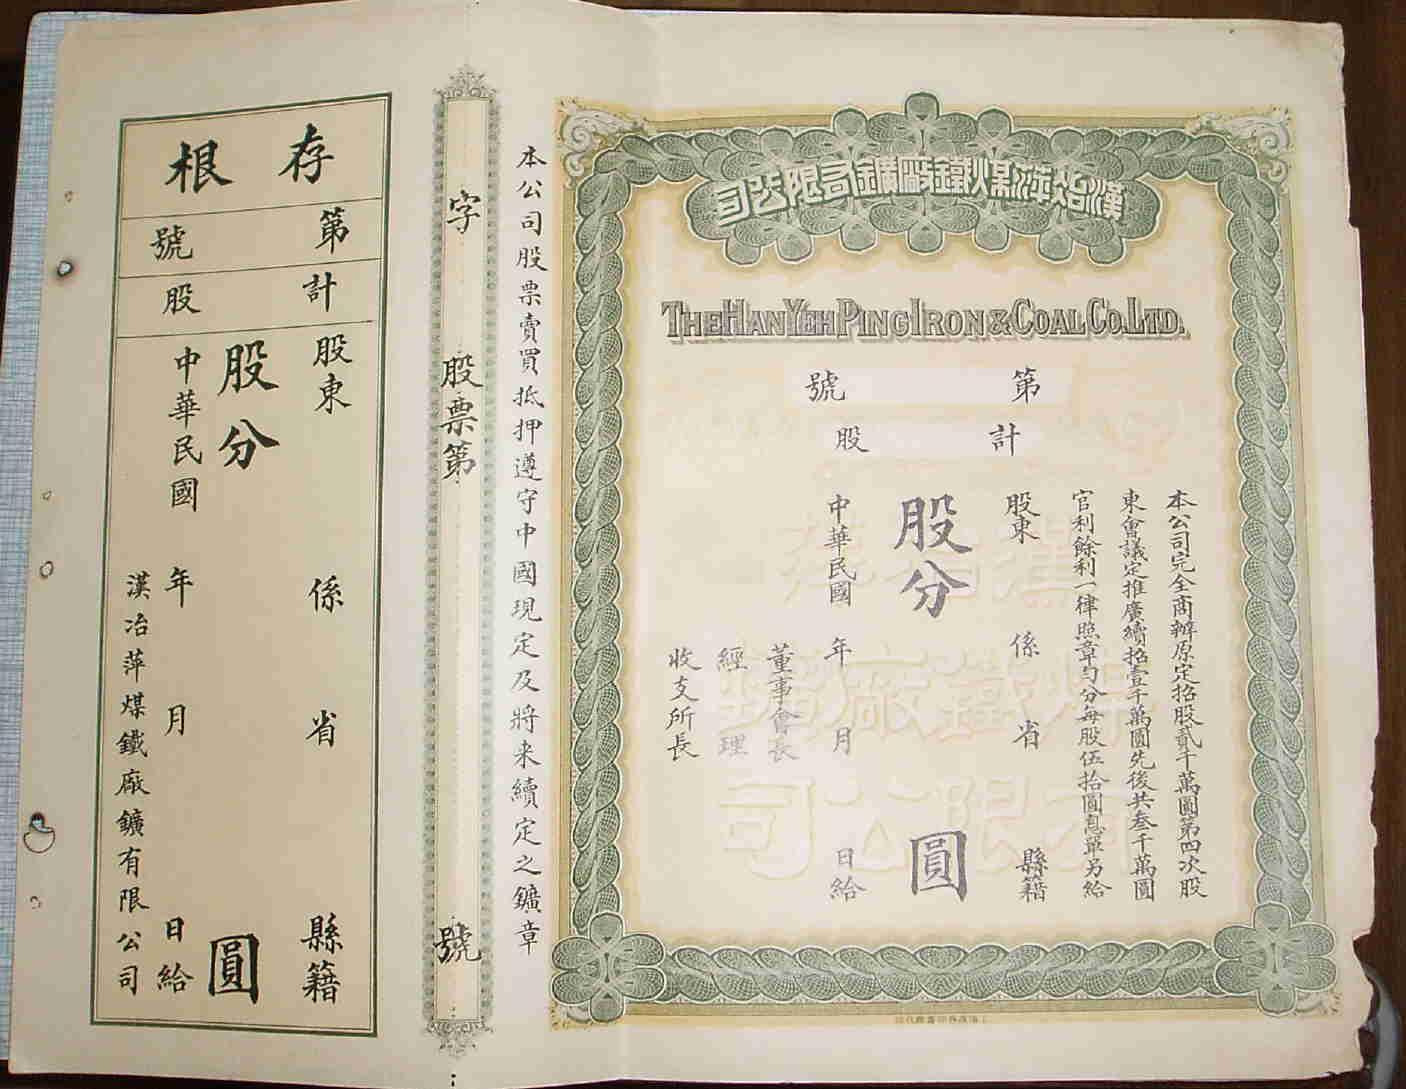 S0157, Han Yeh Ping Iron & Coal Co., Ltd, China Stock Certificate of 1910's, Unused